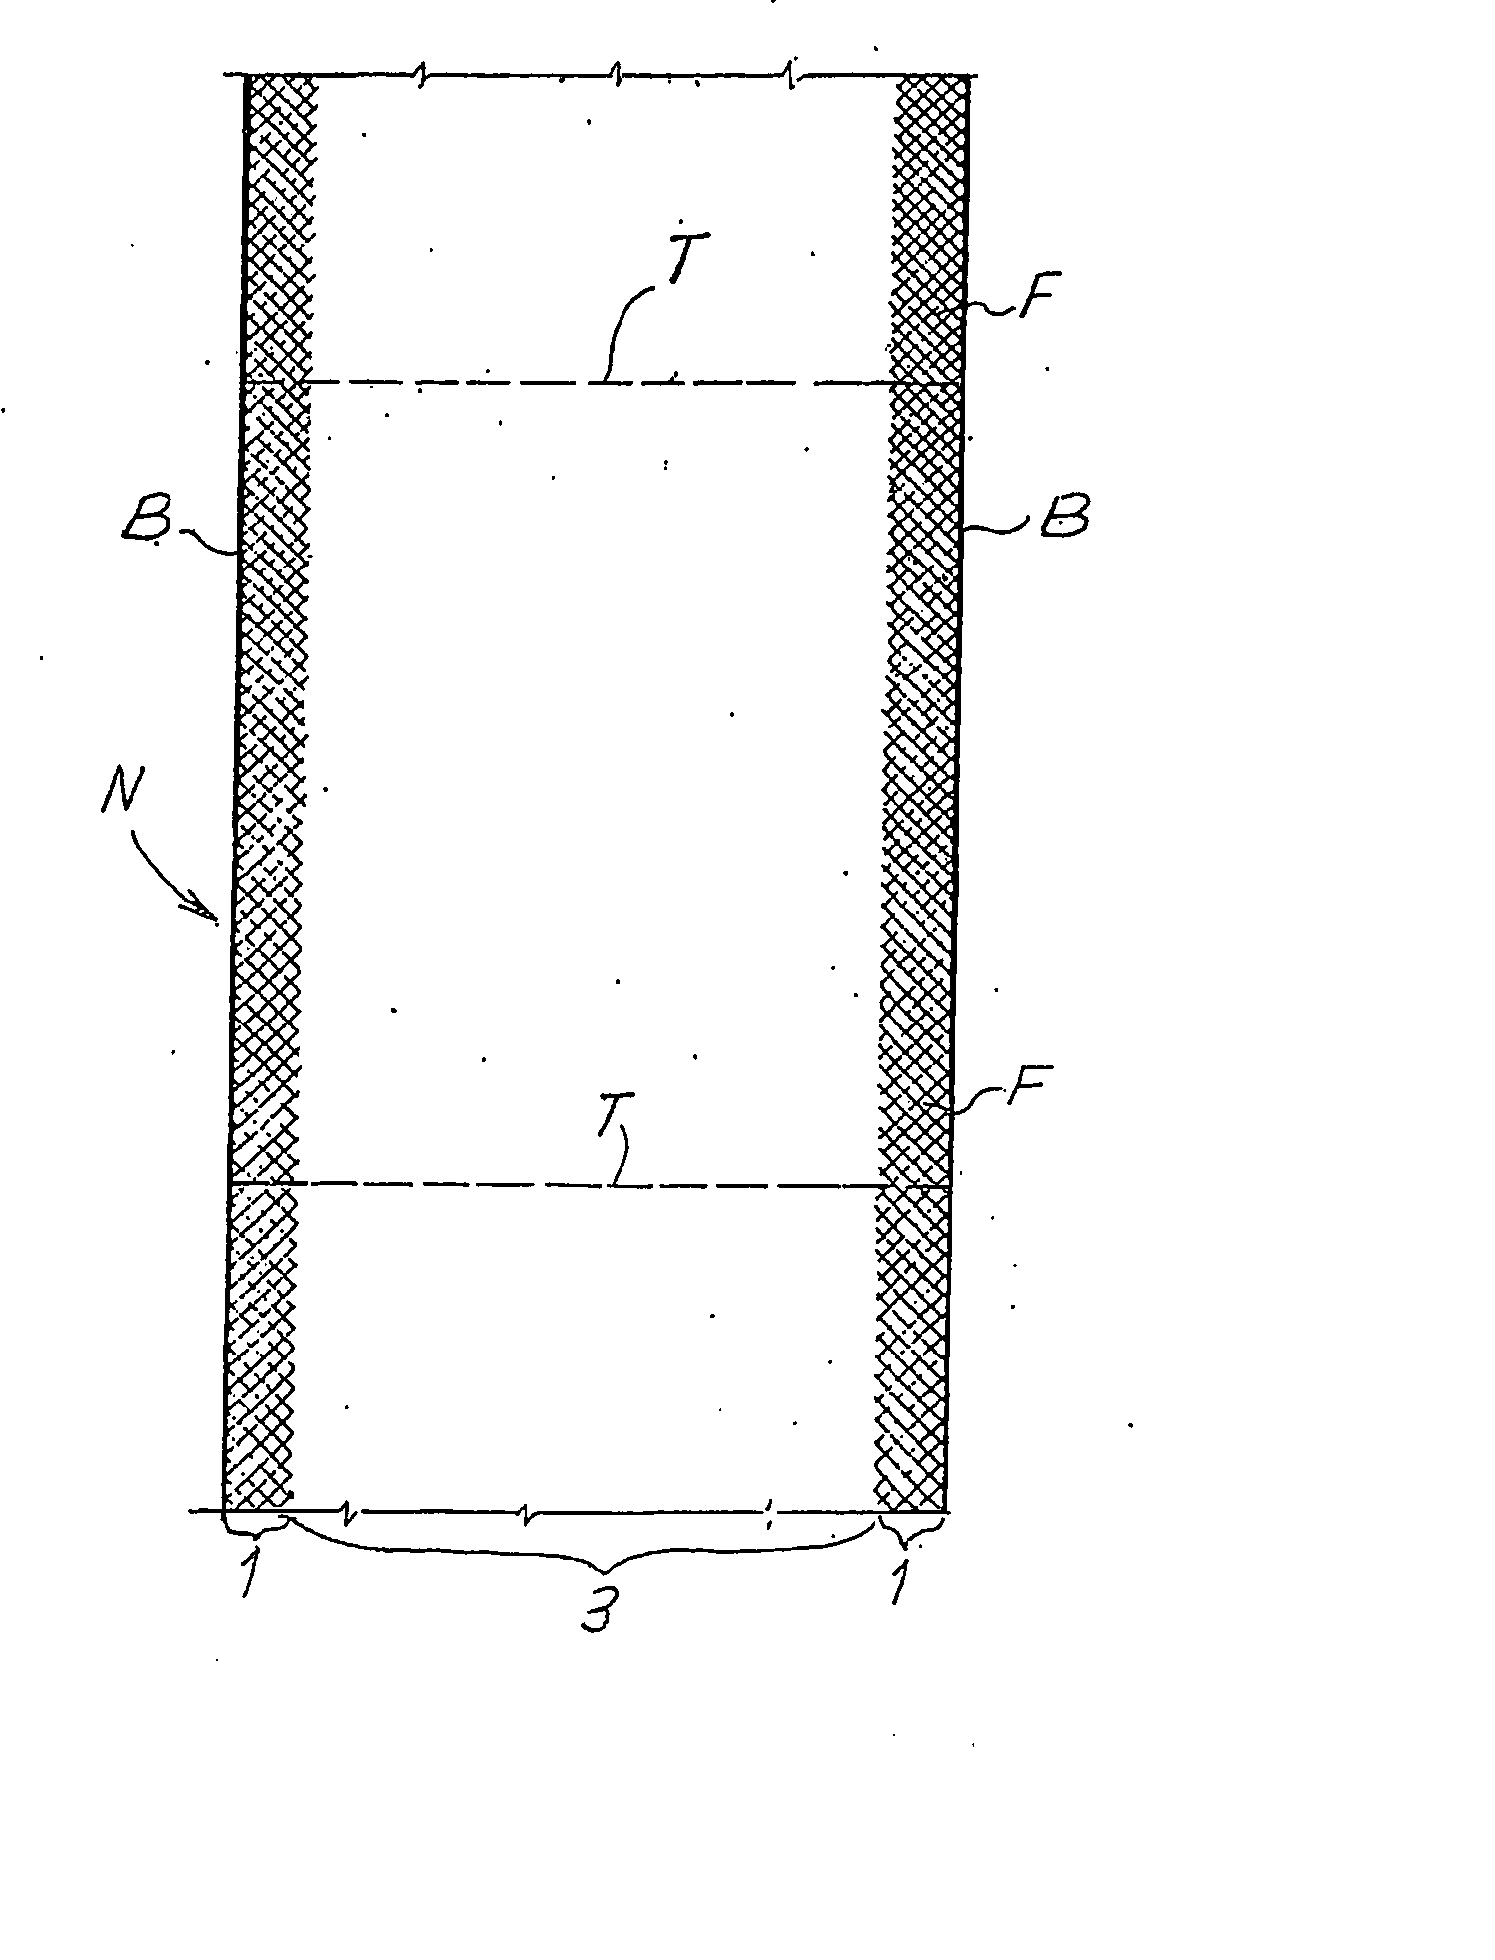 Sheet Product Comprising at Least Two Plies Joined by Gluing with Non-Uniform Distribution of the Glue